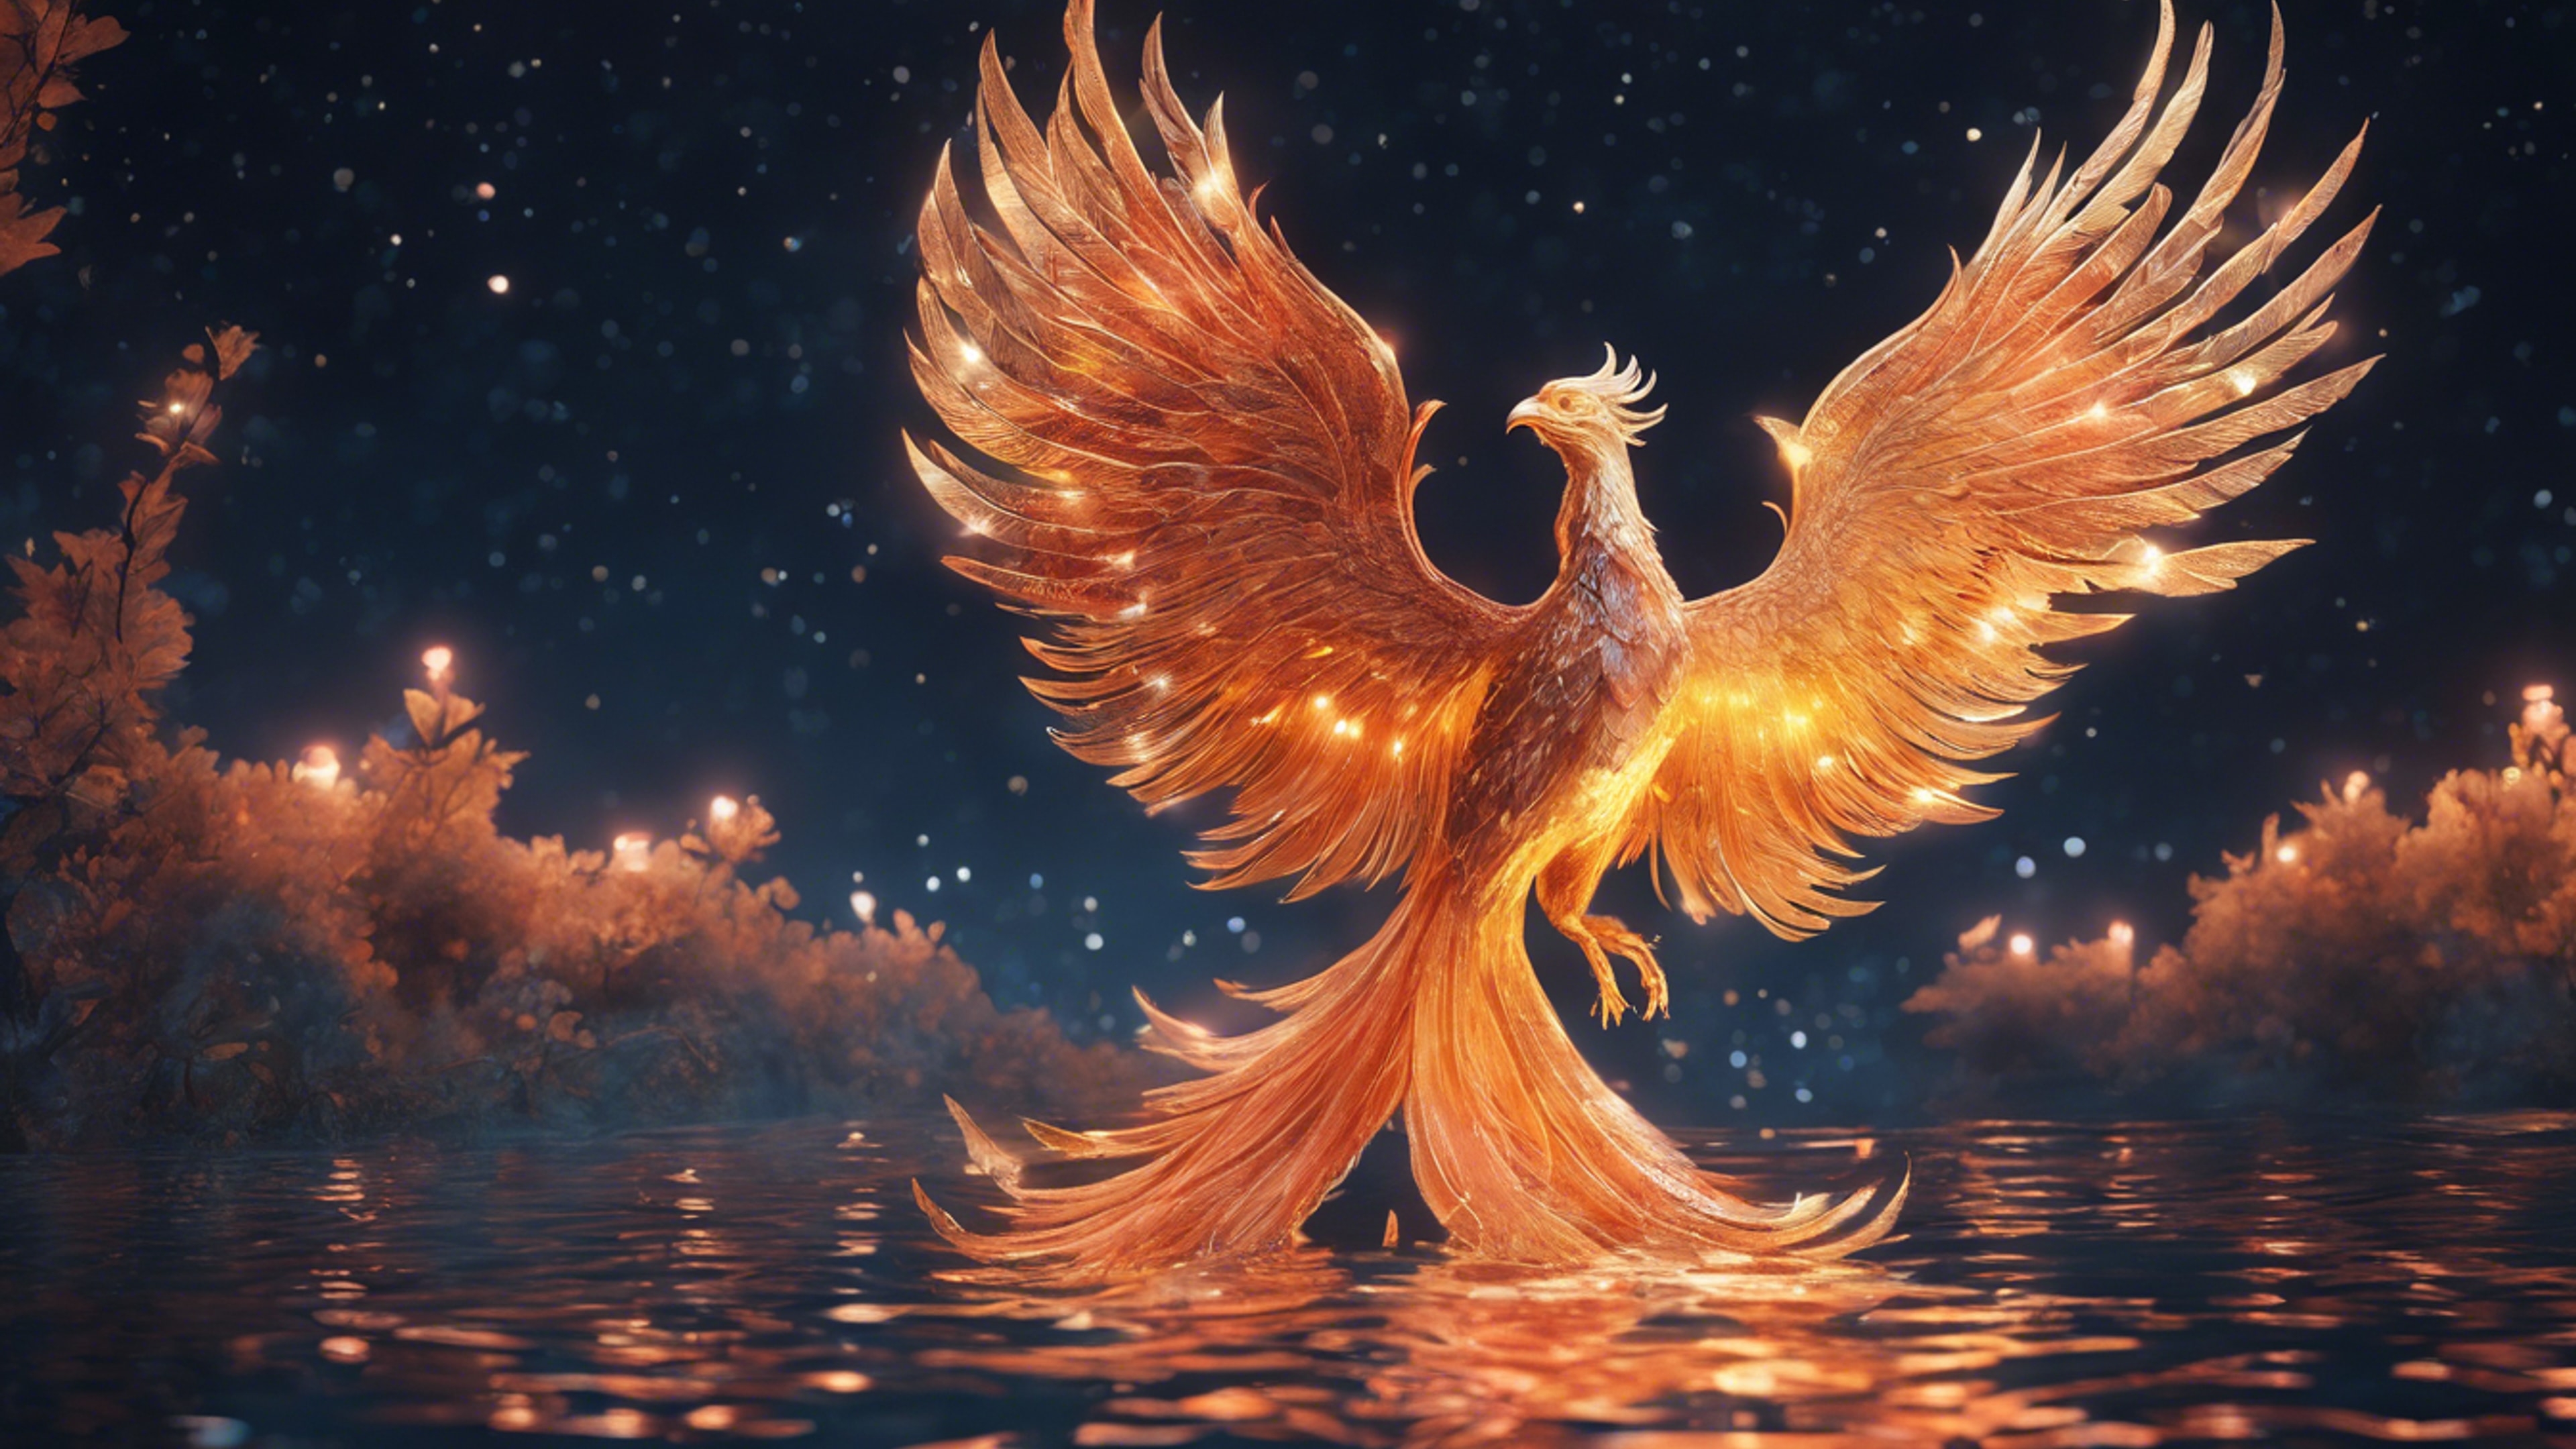 A beautiful scene depicting a mythical phoenix bathing in the glow of the midnight moon. Wallpaper[60dca798264c4df78287]